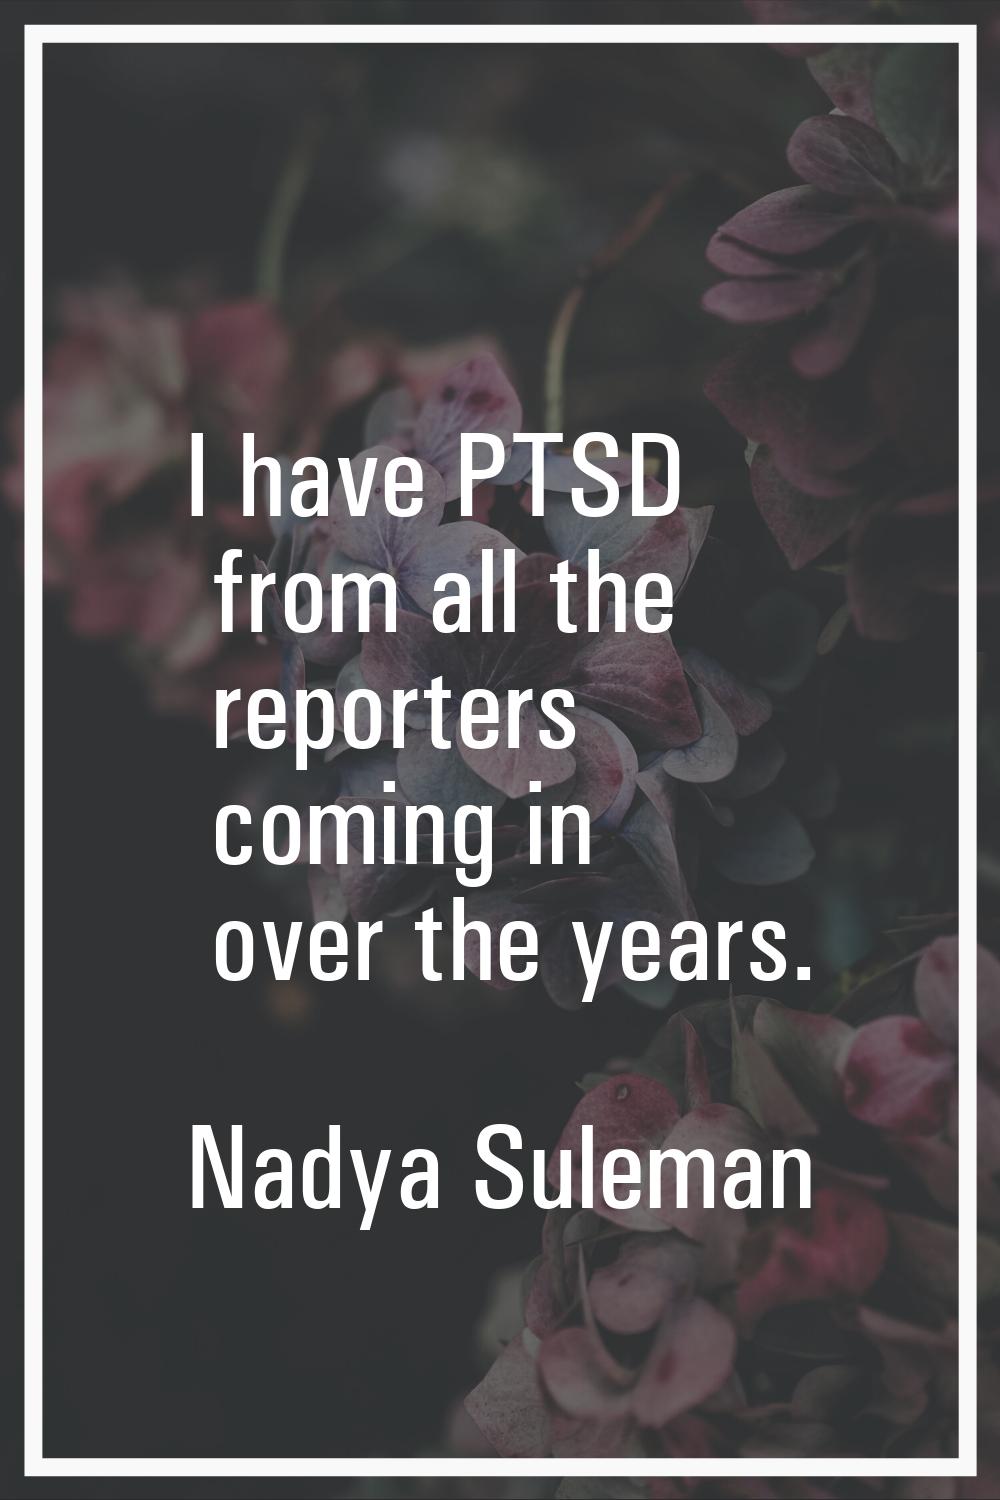 I have PTSD from all the reporters coming in over the years.